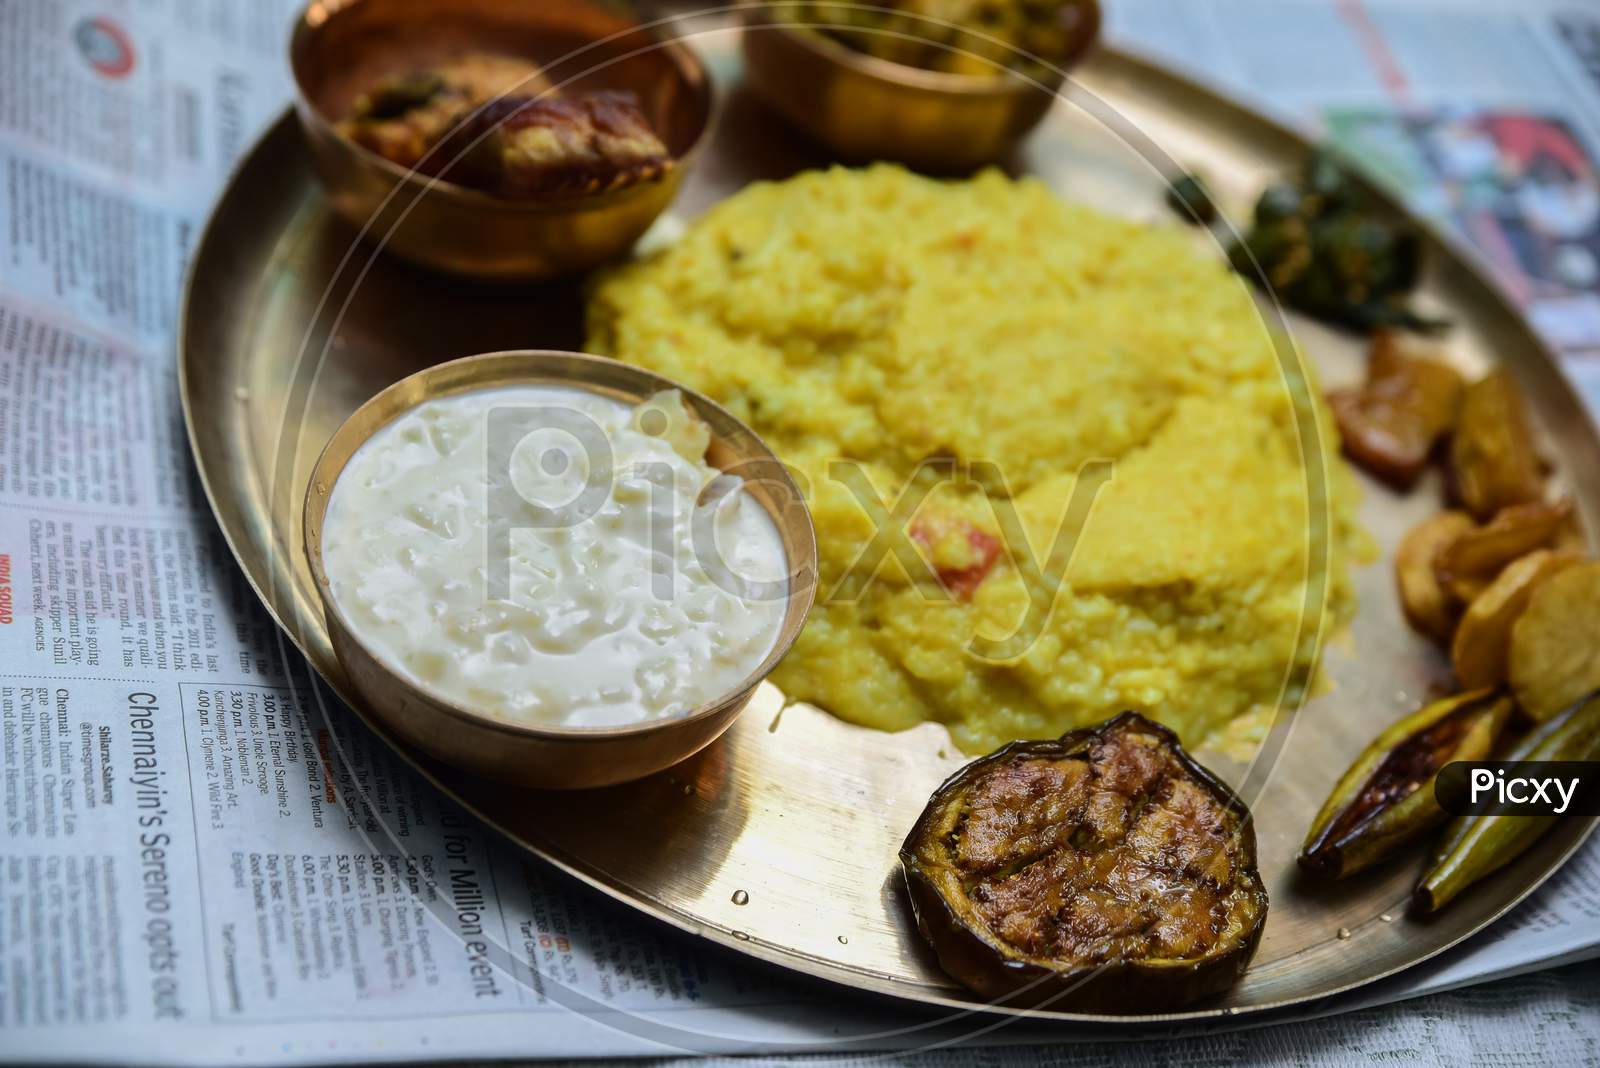 Traditional Indian dishes Paes and misti doi , blurred rice and non veg bengali meal. Special food preparation for rice ceremony in West Bengal